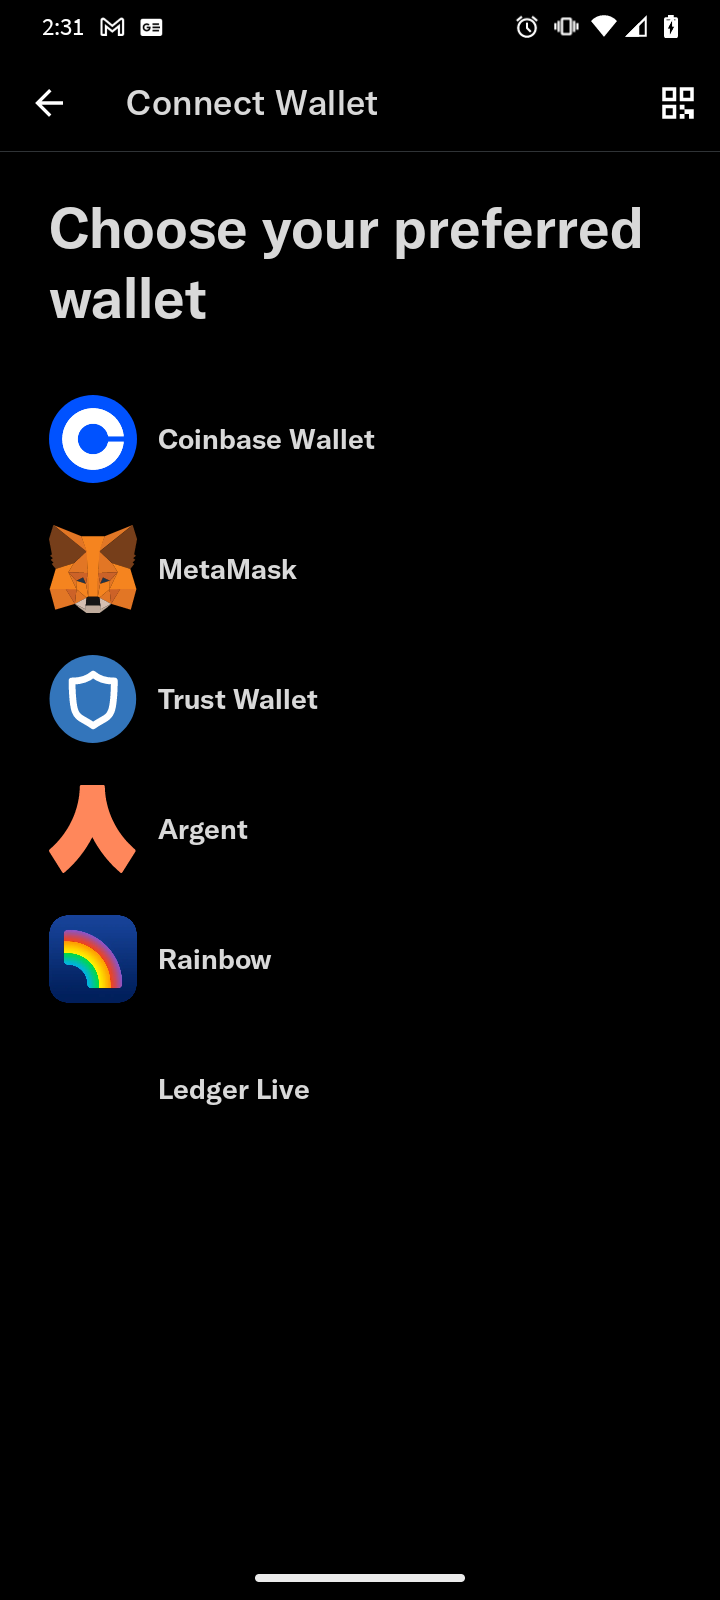 Wallets supported by Twitter Blue for NFT profile pictures.